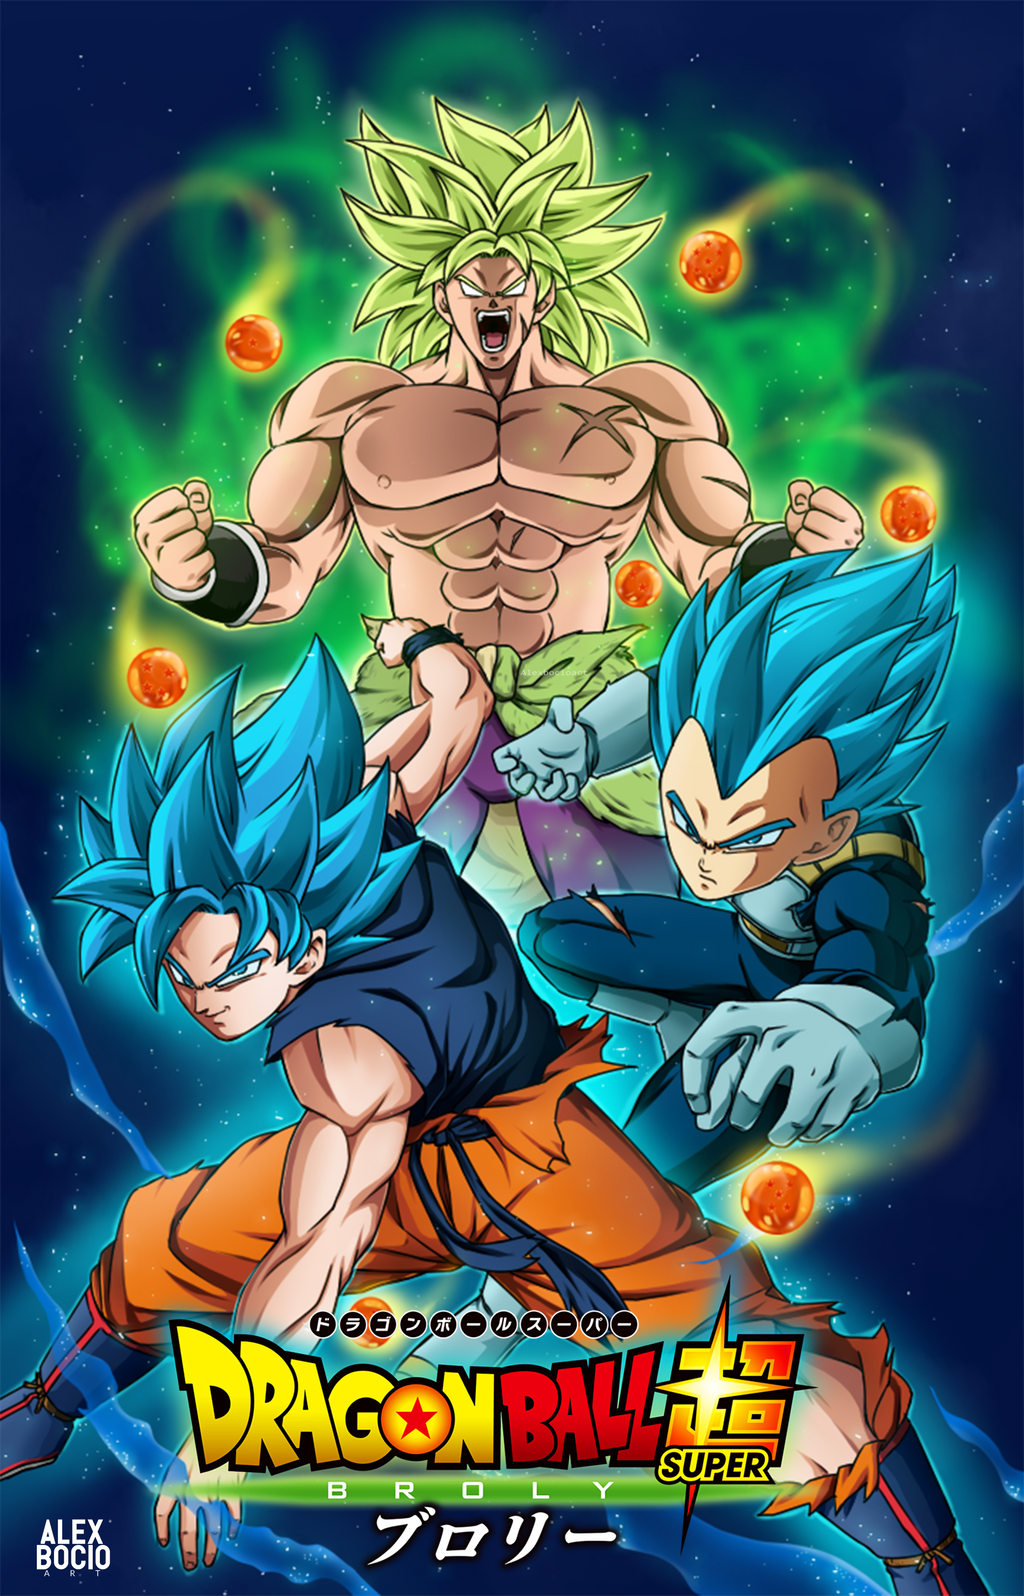 Dragon ball super broly release date